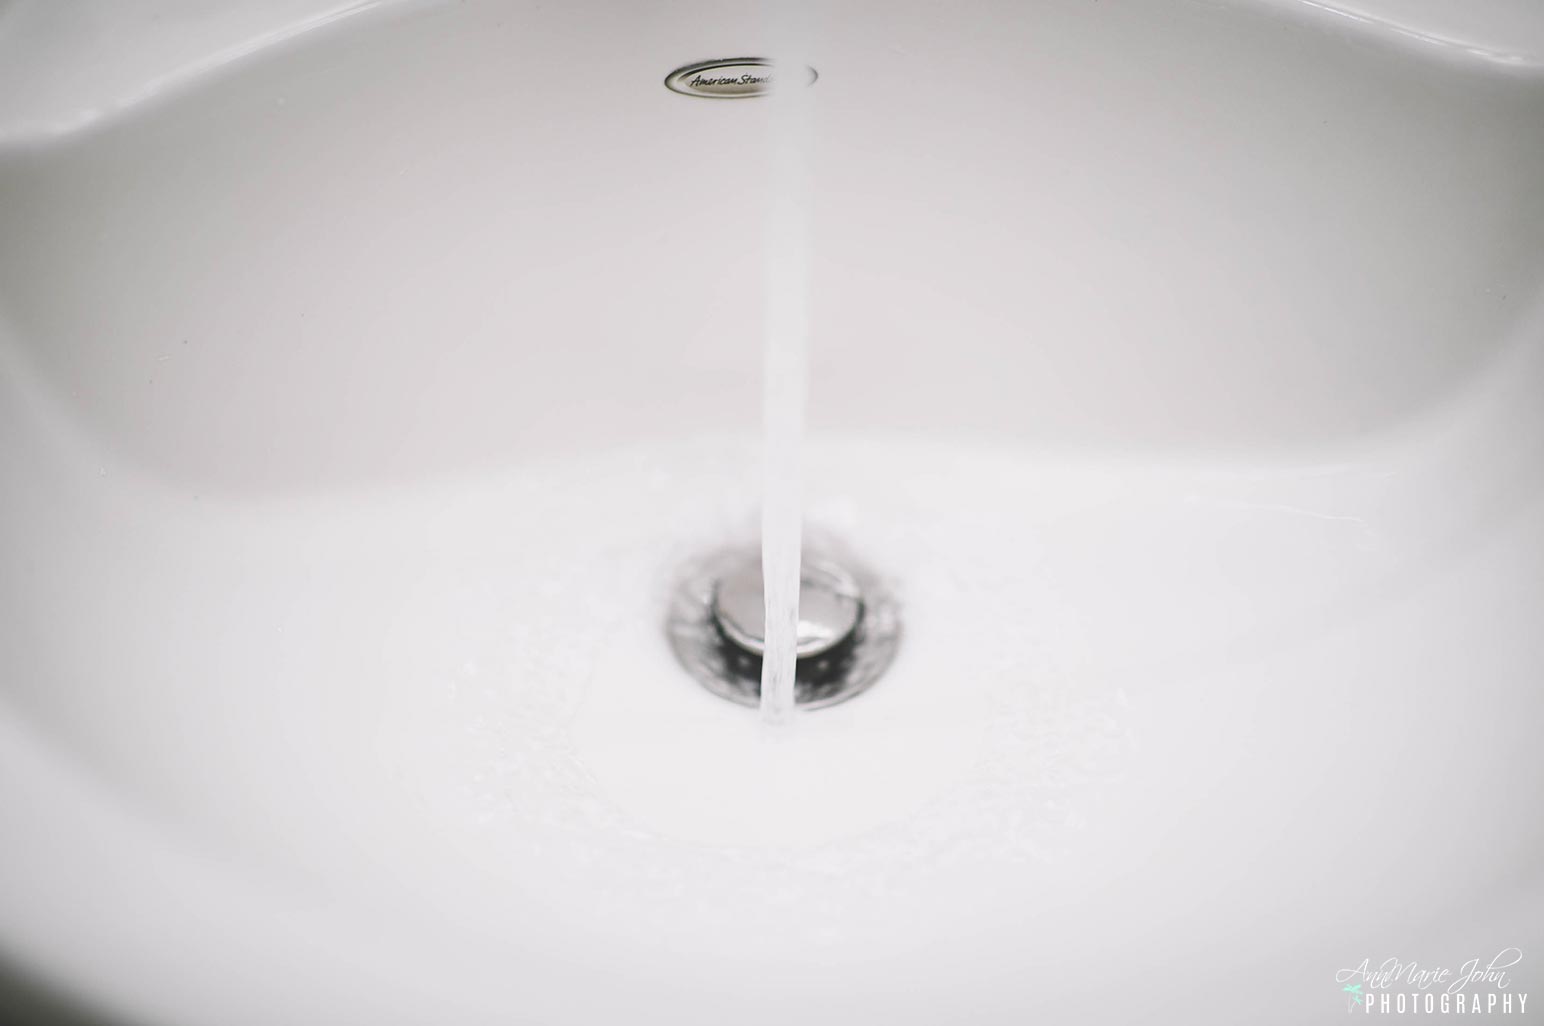 How to Unclog and Maintain your Drains Without Chemicals